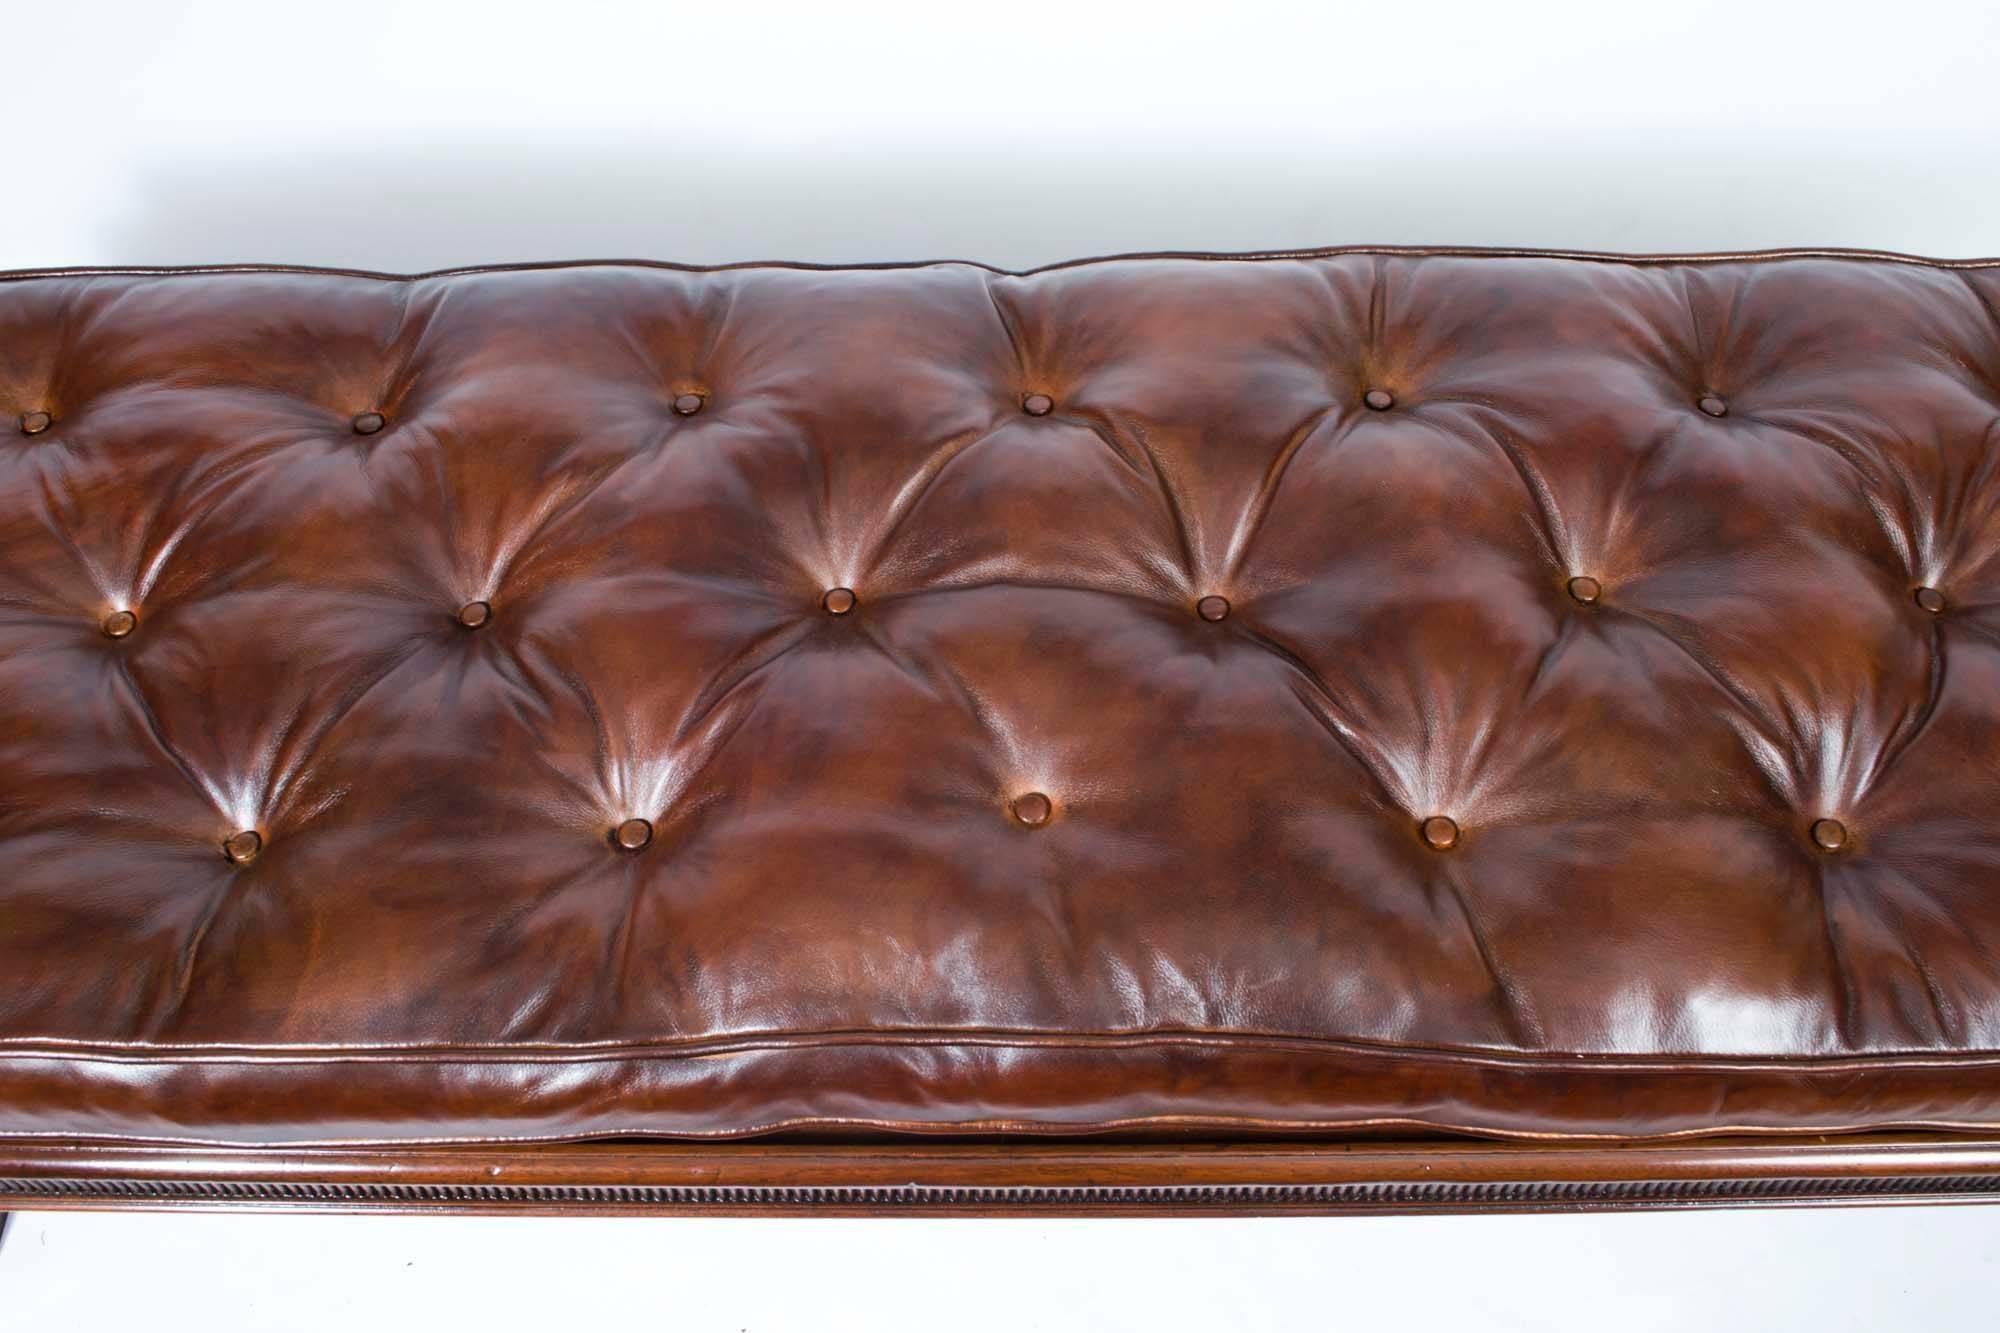 This is a stunning antique William IV mahogany and leather banquette or stool, circa 1835 in date.
 
It has fantastic button backed leather upholstery in a fabulous color, we call it browny burnt orange.

This banquette is truly lovely and would